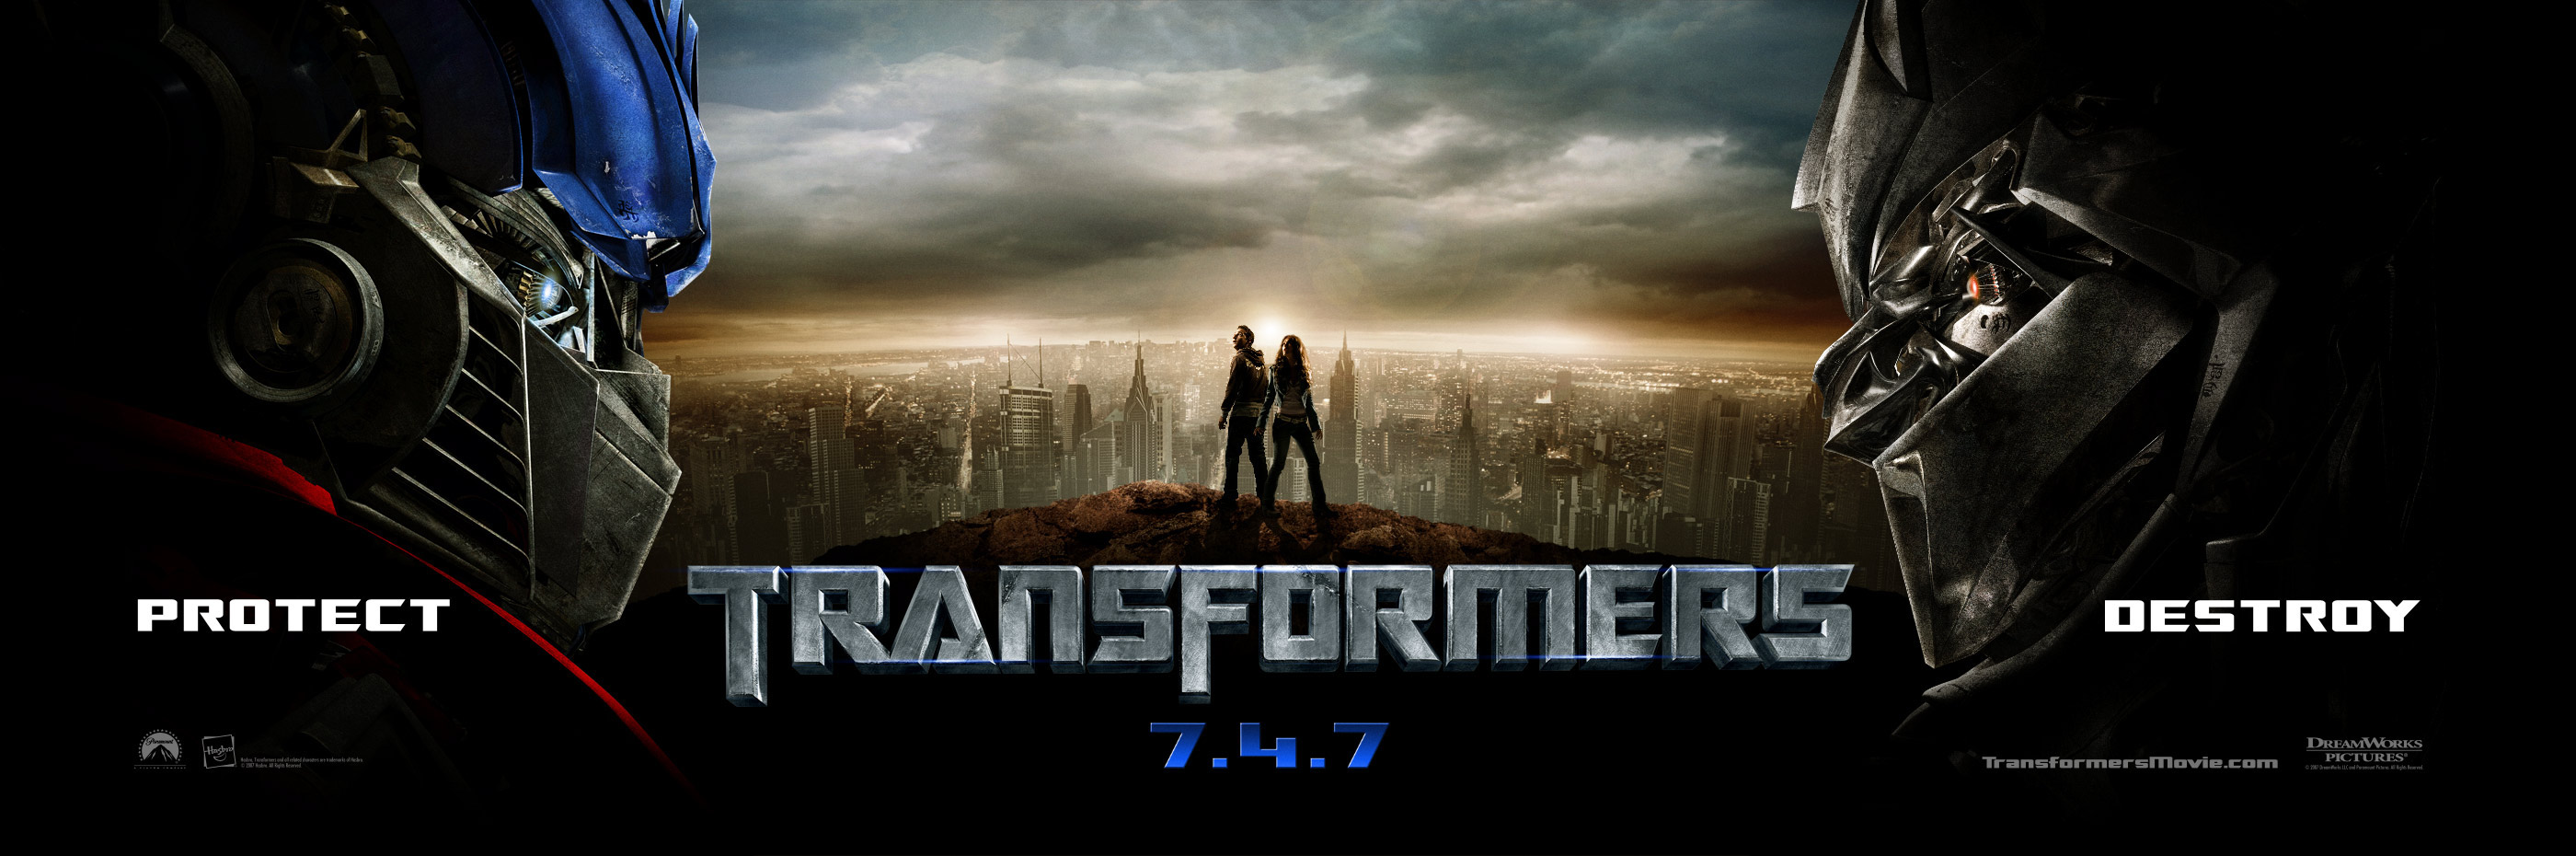 Transformers The Movie: Poster  Transformers, Transformers film